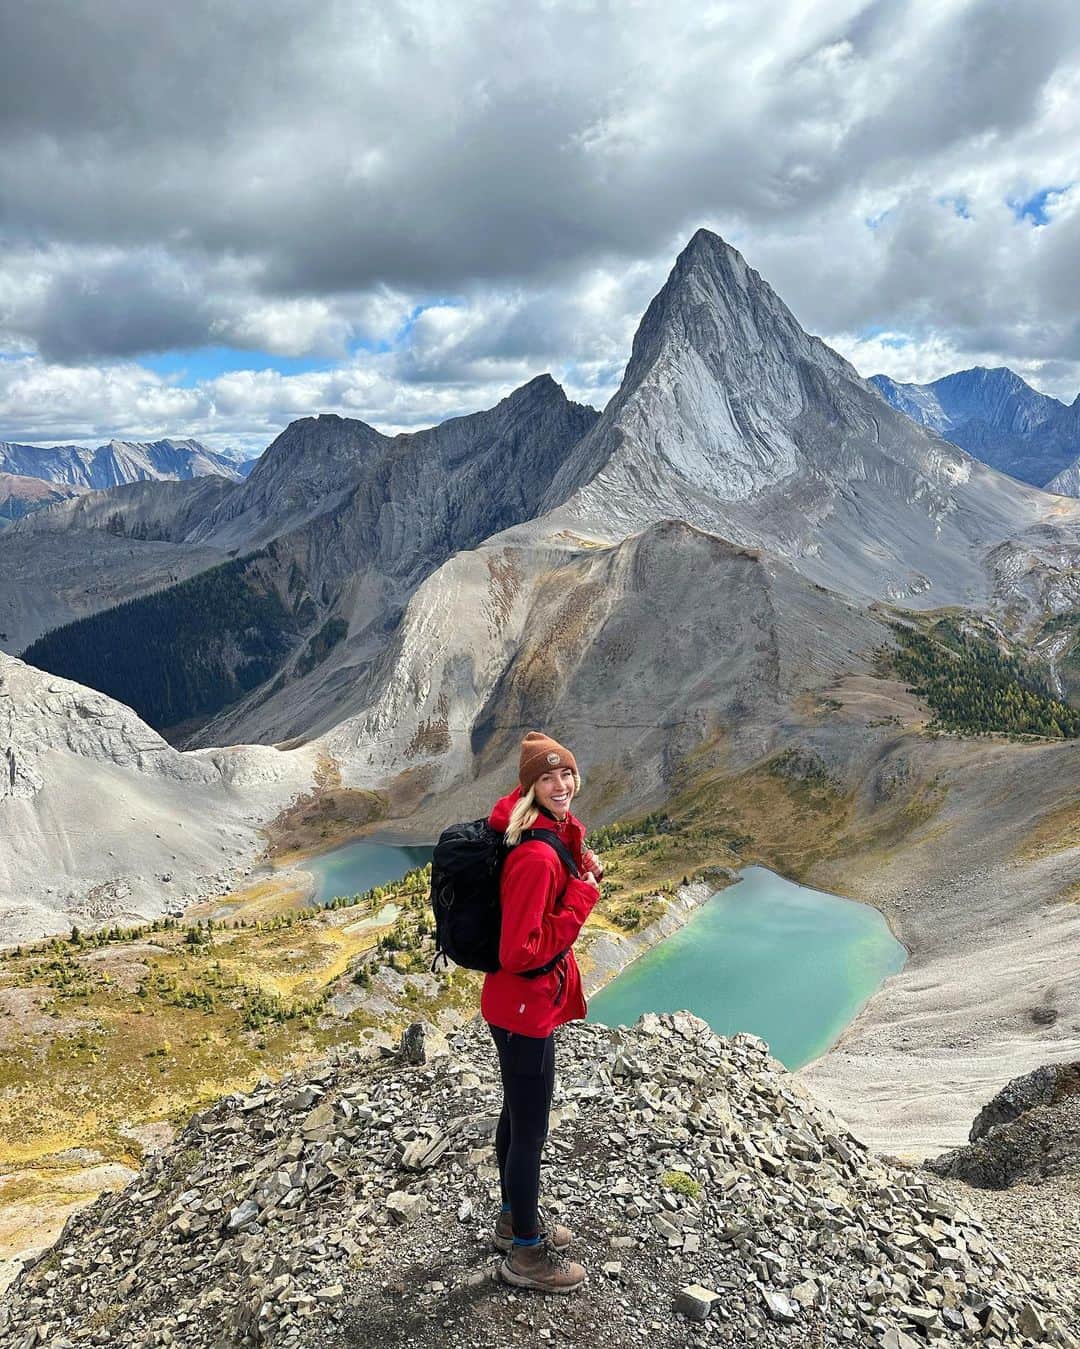 Zanna Van Dijkのインスタグラム：「📍Smutwood Peak, Kananaskis 🇨🇦  Tag someone you want to conquer this route with! 🥾   Guys, this was one of the best hikes of my LIFE 😭 It’s the route which inspired our whole trip to the Kananaskis region of the Rockies and it surpassed all our expectations!! The views and landscapes were truly breathtaking. Add it to your hiking bucket list ASAP! ☑️   Here’s the deets: ➡️ Distance: 19km ➡️ Elevation gain: 1000m  ➡️ Difficulty: Hard. The climb is long, steep & relentless. As you near the summit the path narrows then disappears and you have to scramble over scree covered rocks. If you’re not feeling it, you can stop before the scramble and you still get amazing views 👌🏼  ➡️ Location: The trailhead is a short walk from @mountengadine lodge where we stayed. Otherwise you can drive in from Canmore in 45mins-1hr. The drive is STUNNING, but the road to the trailhead is unpaved so ensure you have a suitable car.  See more of the route on my stories! I’m happy to answer any other questions you have! I’ll be listing all our favourite hikes in a travel guide 🇨🇦♥️ #mountsmutwood #smutwood #smutwoodpeak #kananaskis #kananaskiscountry #kananaskisalberta」